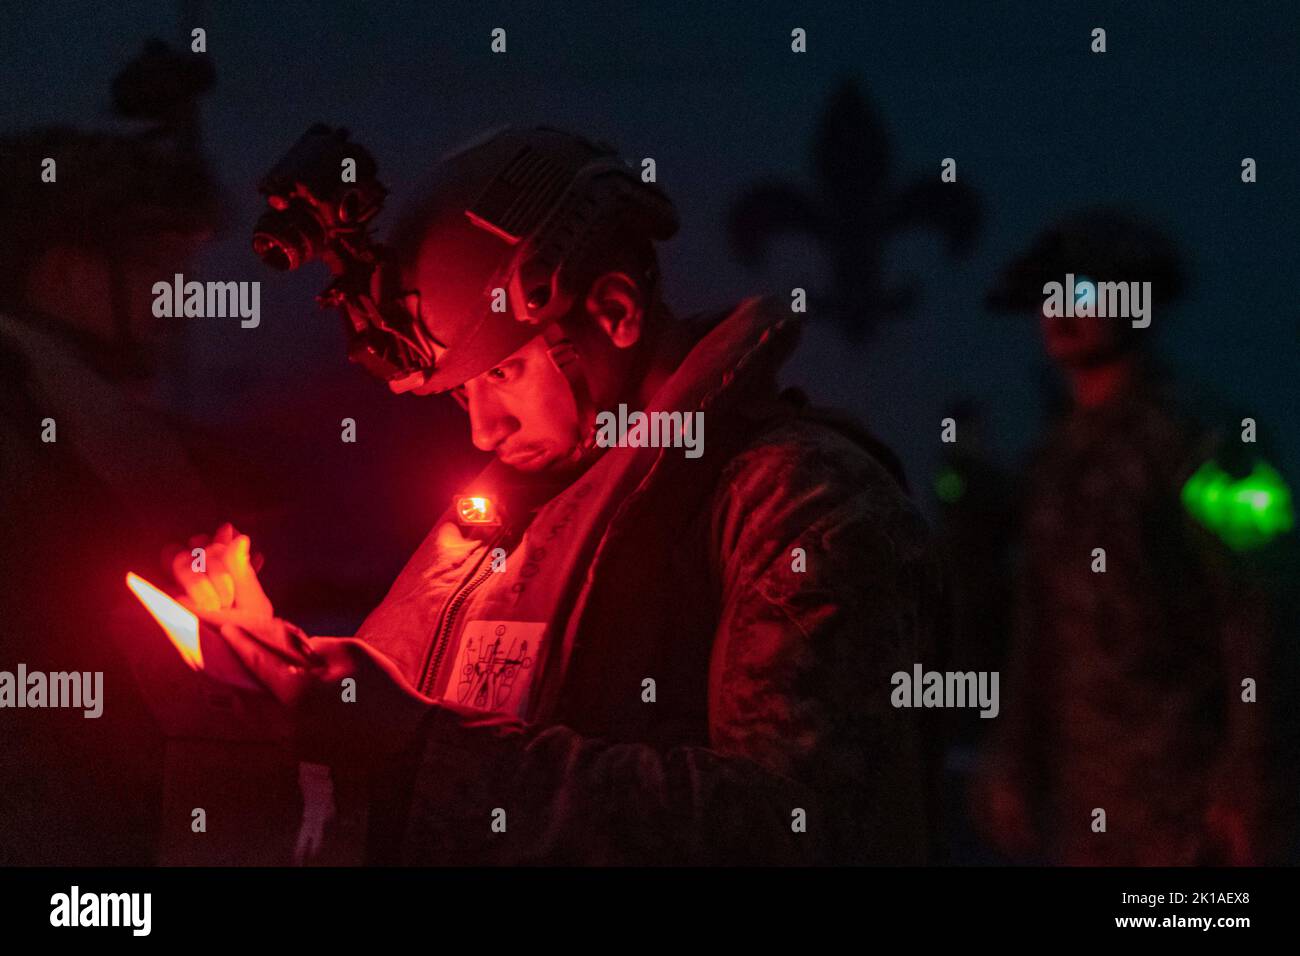 A U.S. Marine with Battalion Landing Team 2/5, 31st Marine Expeditionary Unit, writes down information before a night casualty evacuation exercise aboard USS New Orleans (LPD 18) in the Sea of Japan, Sept. 11, 2022. This integrated training establishes confidence and familiarity between the Marines and Sailors for in-flight medical treatment. The 31st MEU is operating aboard ships of the Tripoli Amphibious Ready Group in the 7th fleet area of operations to enhance interoperability with allies and partners and serve as a ready response force to defend peace and stability in the Indo-Pacific Reg Stock Photo